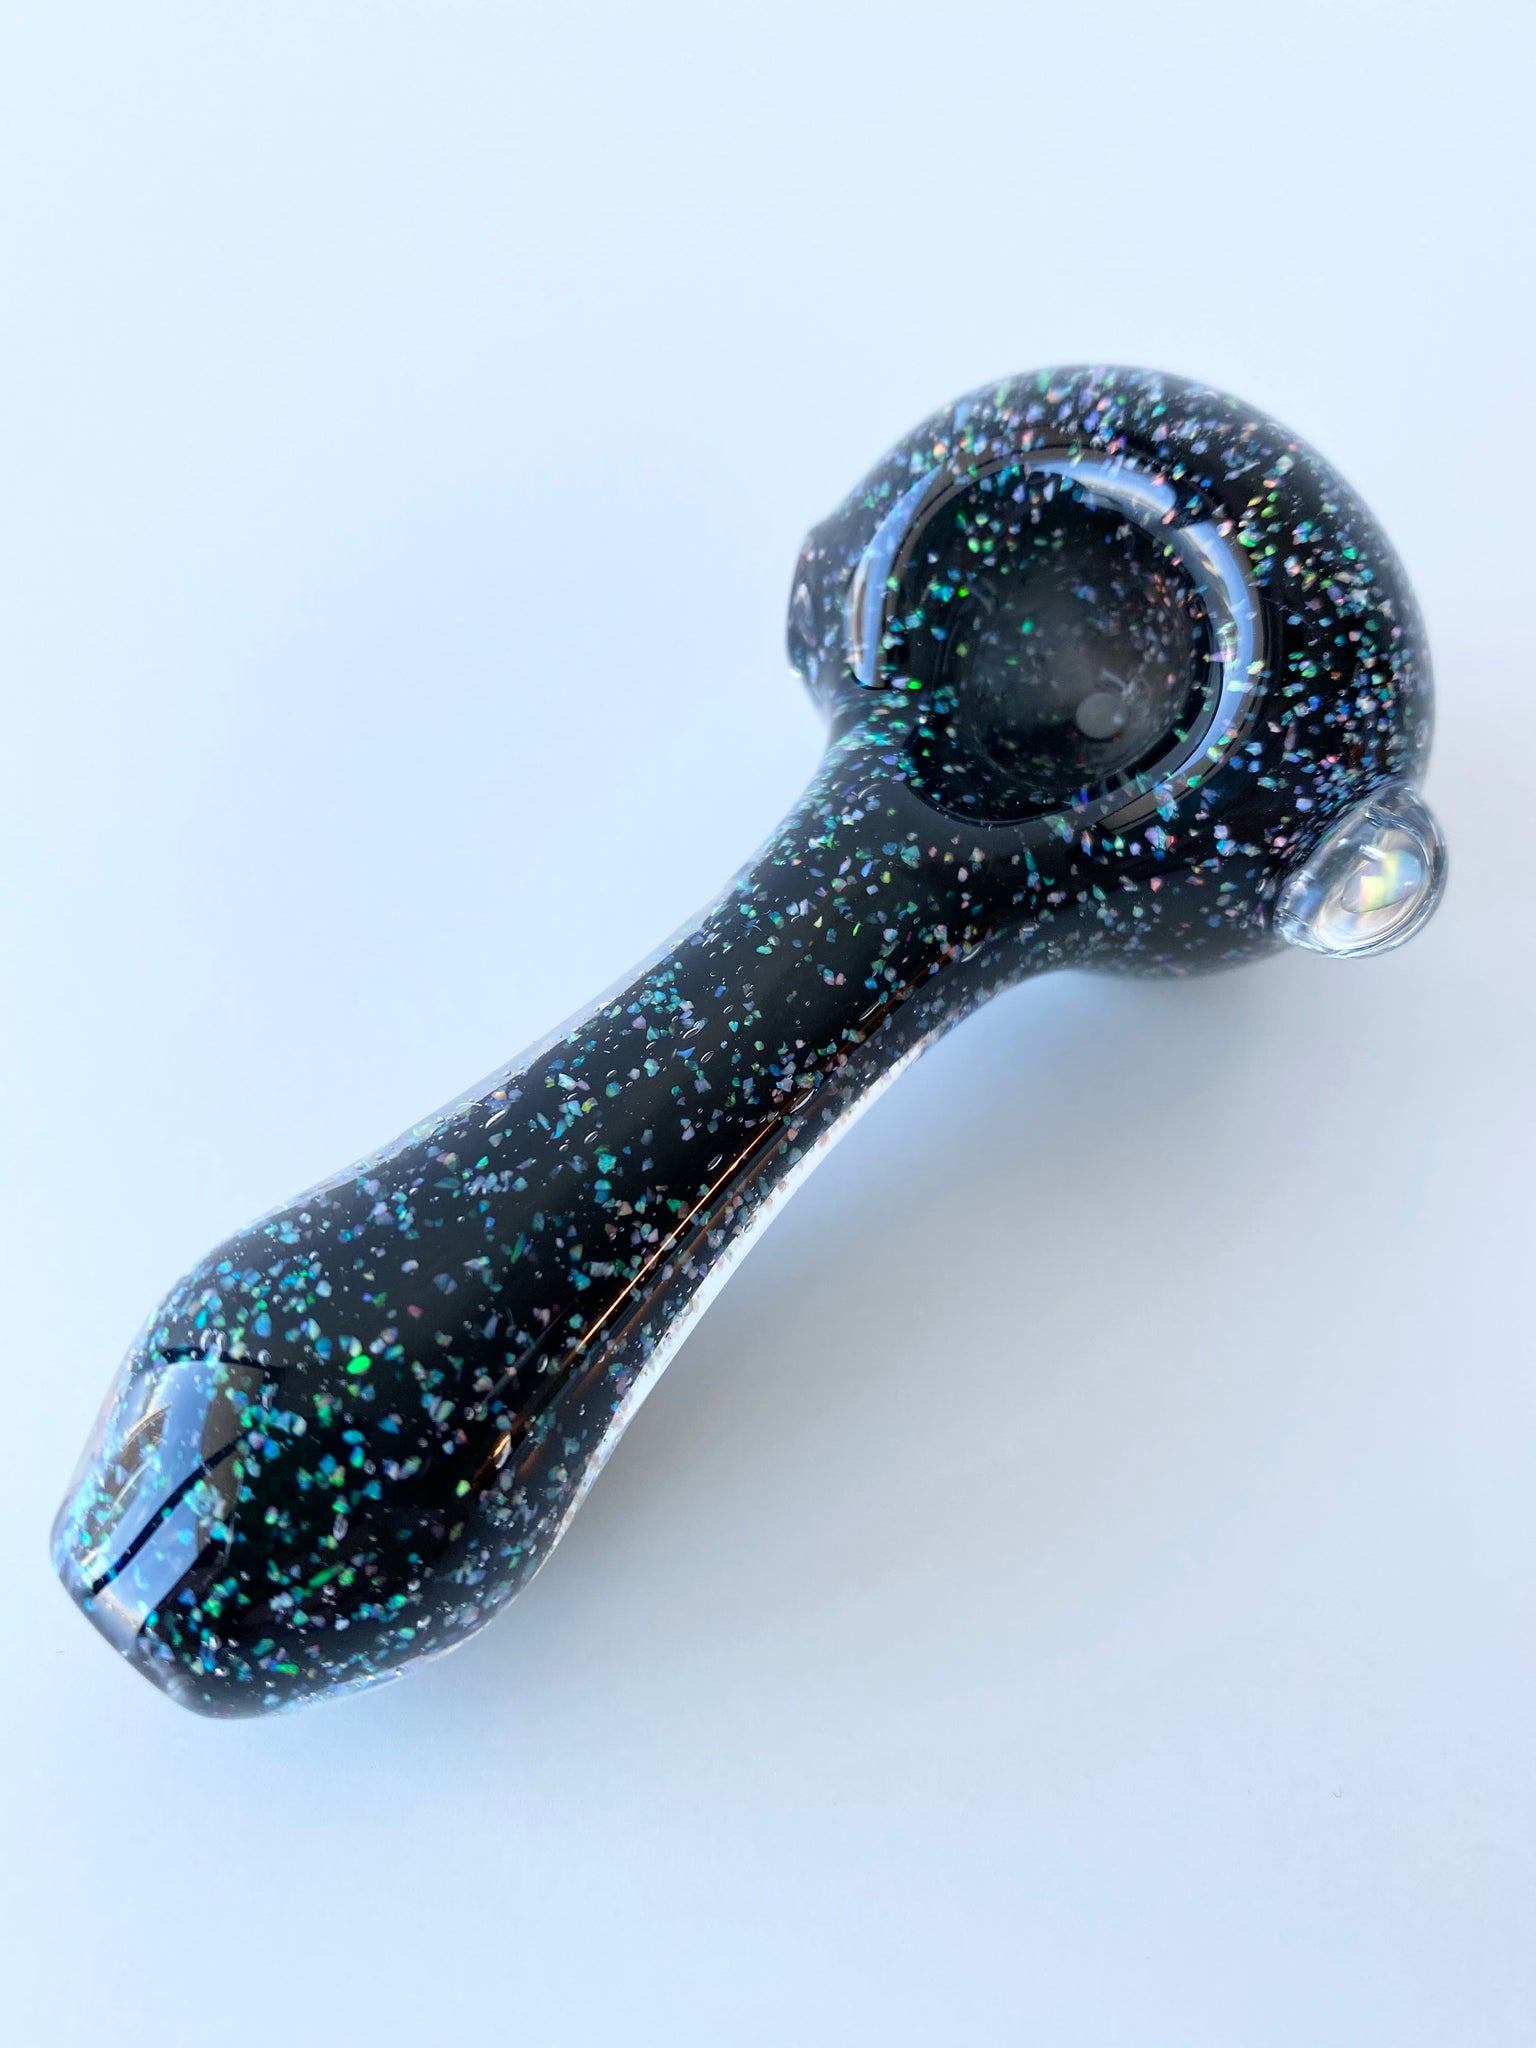 crushed opal spoon pipe